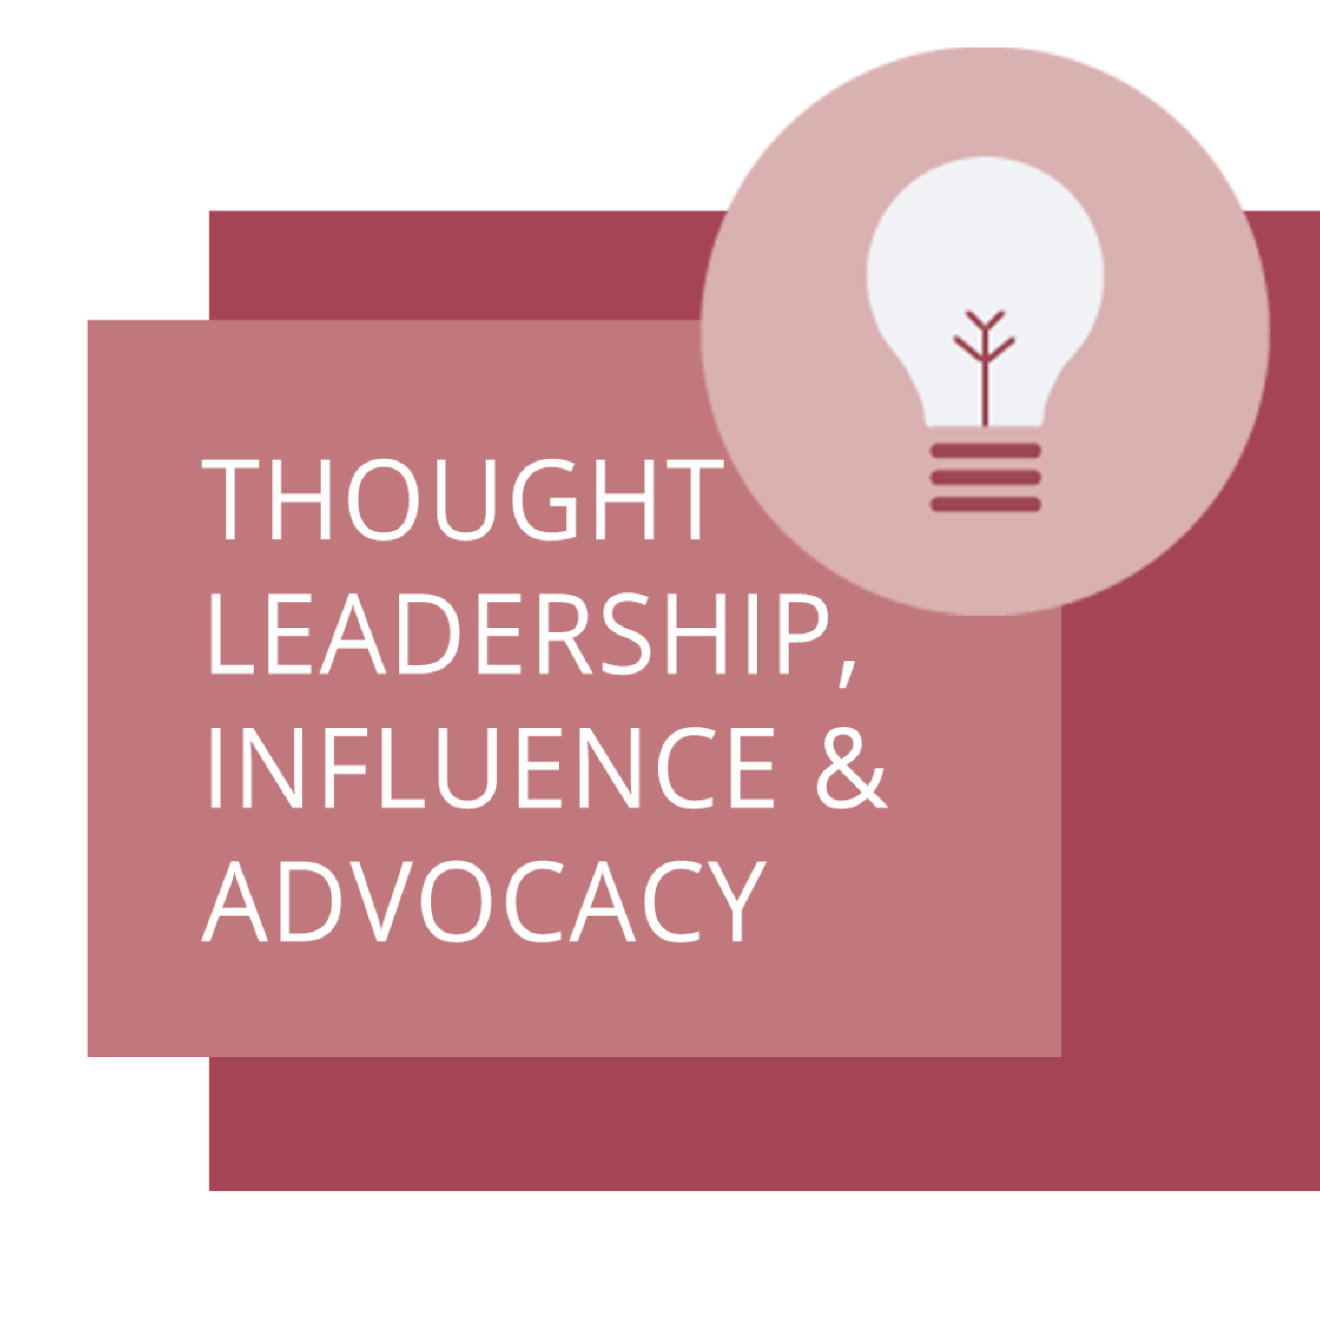 Thought leadership, influence and advocacy